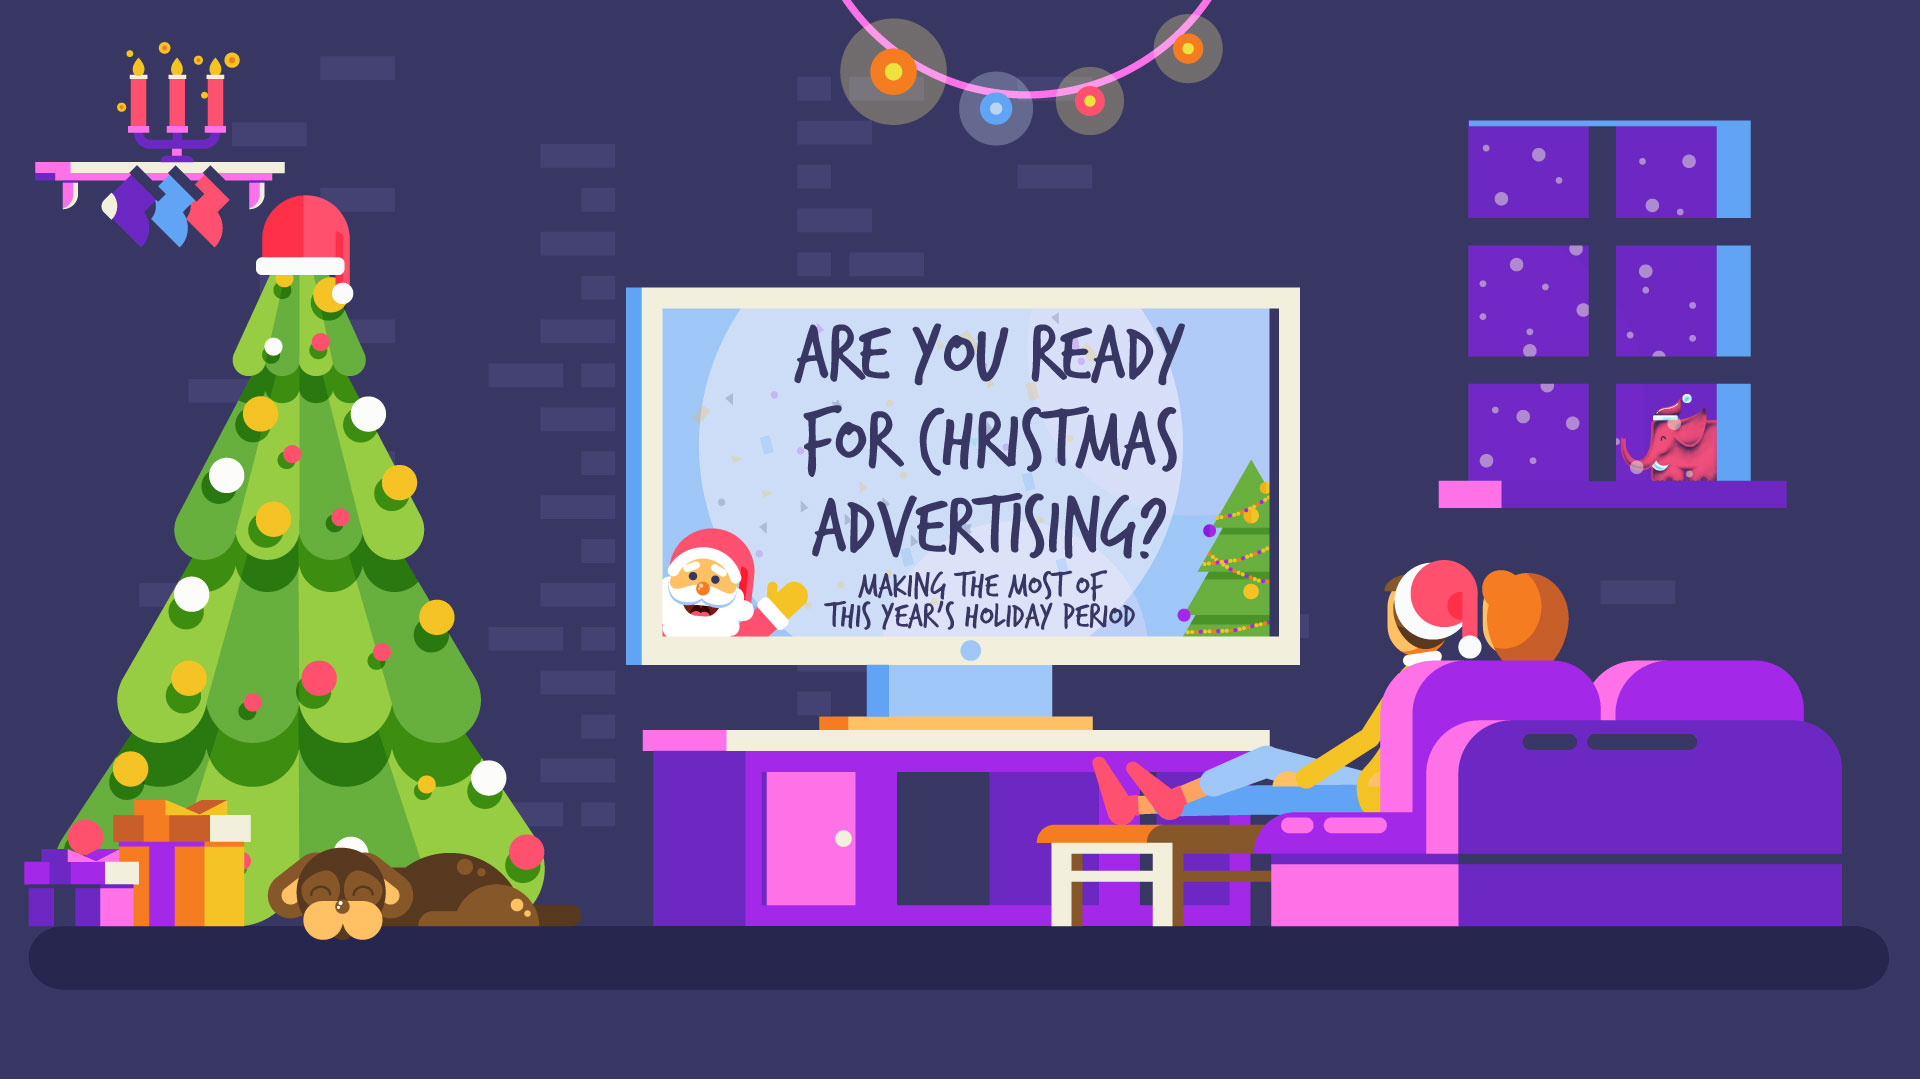 Are You Ready For Christmas Advertising?